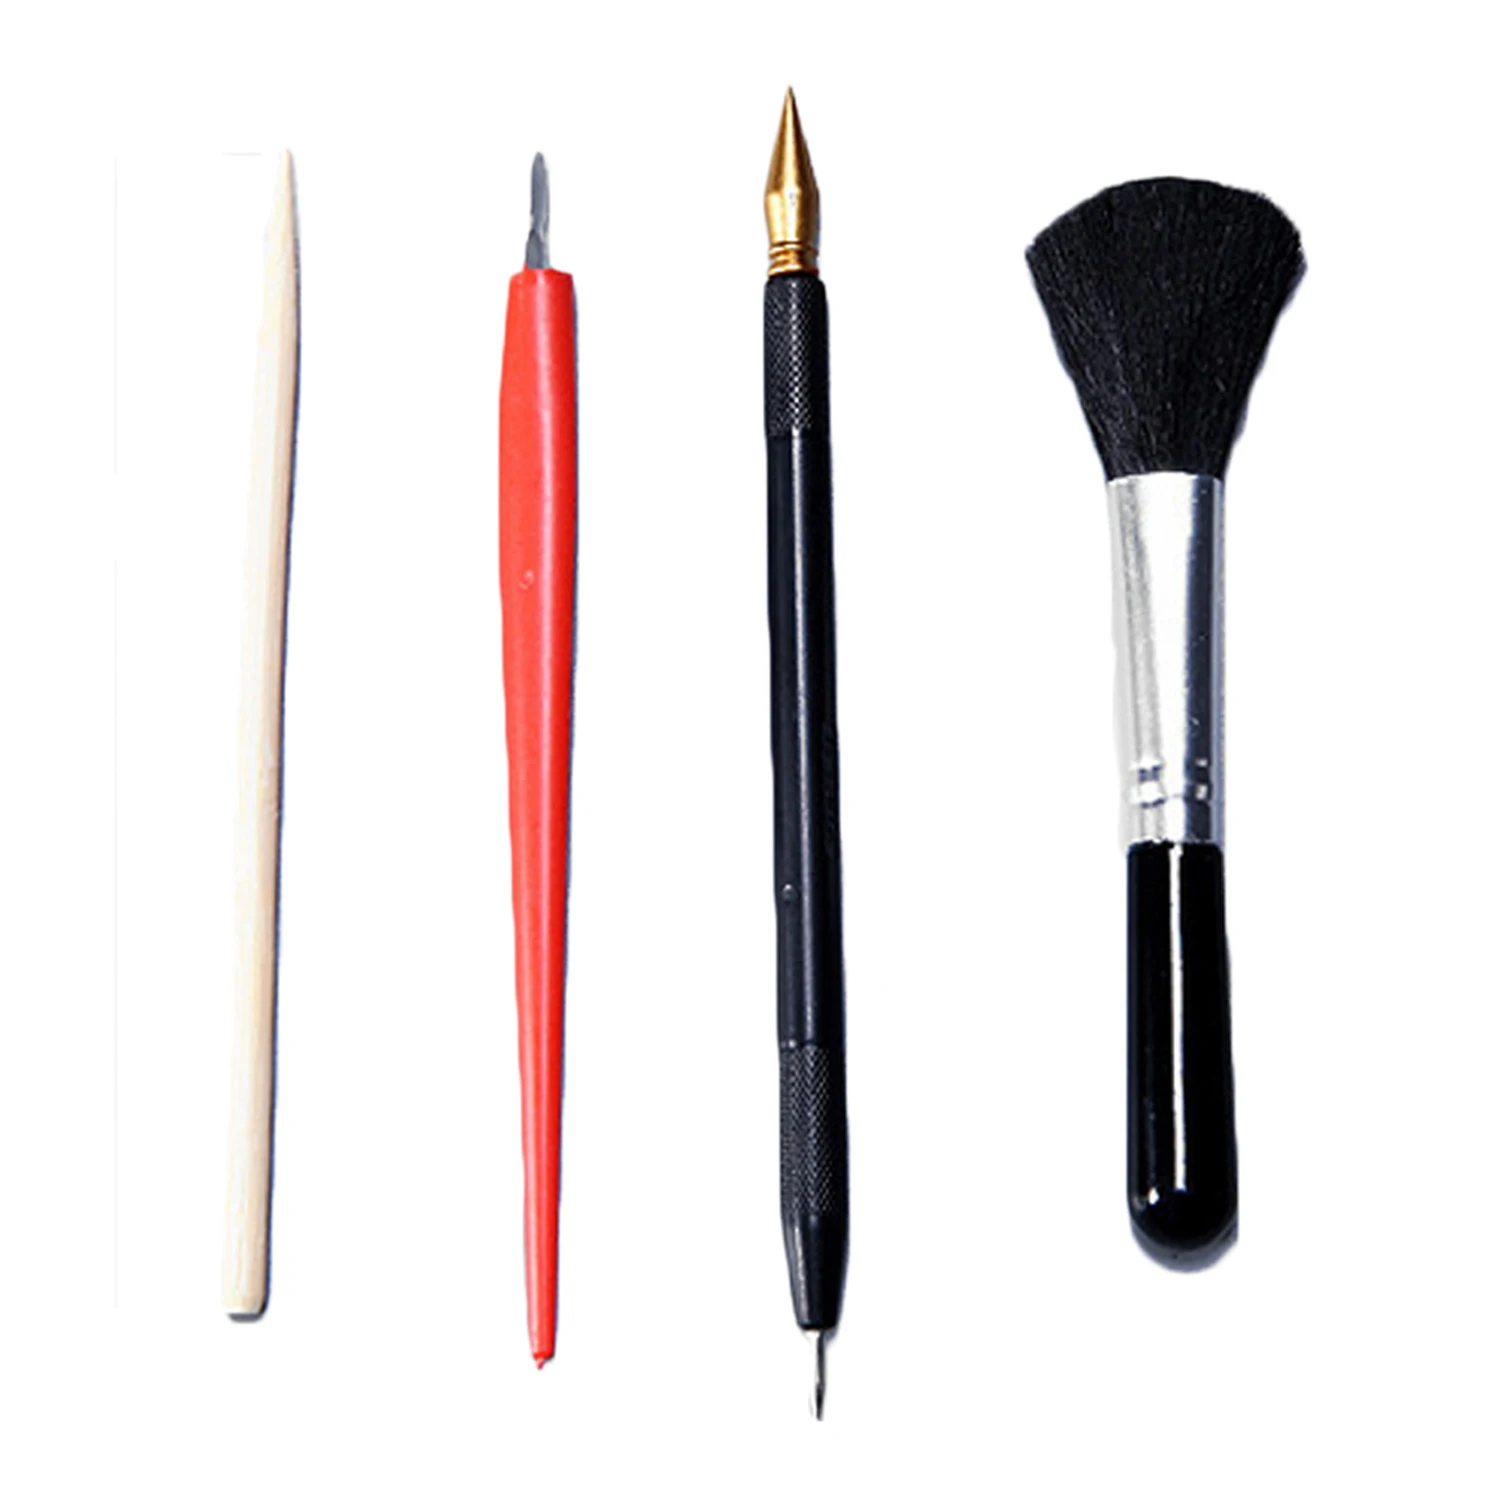 4PCS Scraping Painting Drawing Arts Set with Stick Scraper Pen Black Brush for Sketch Art Painting Papers Sheets Boards